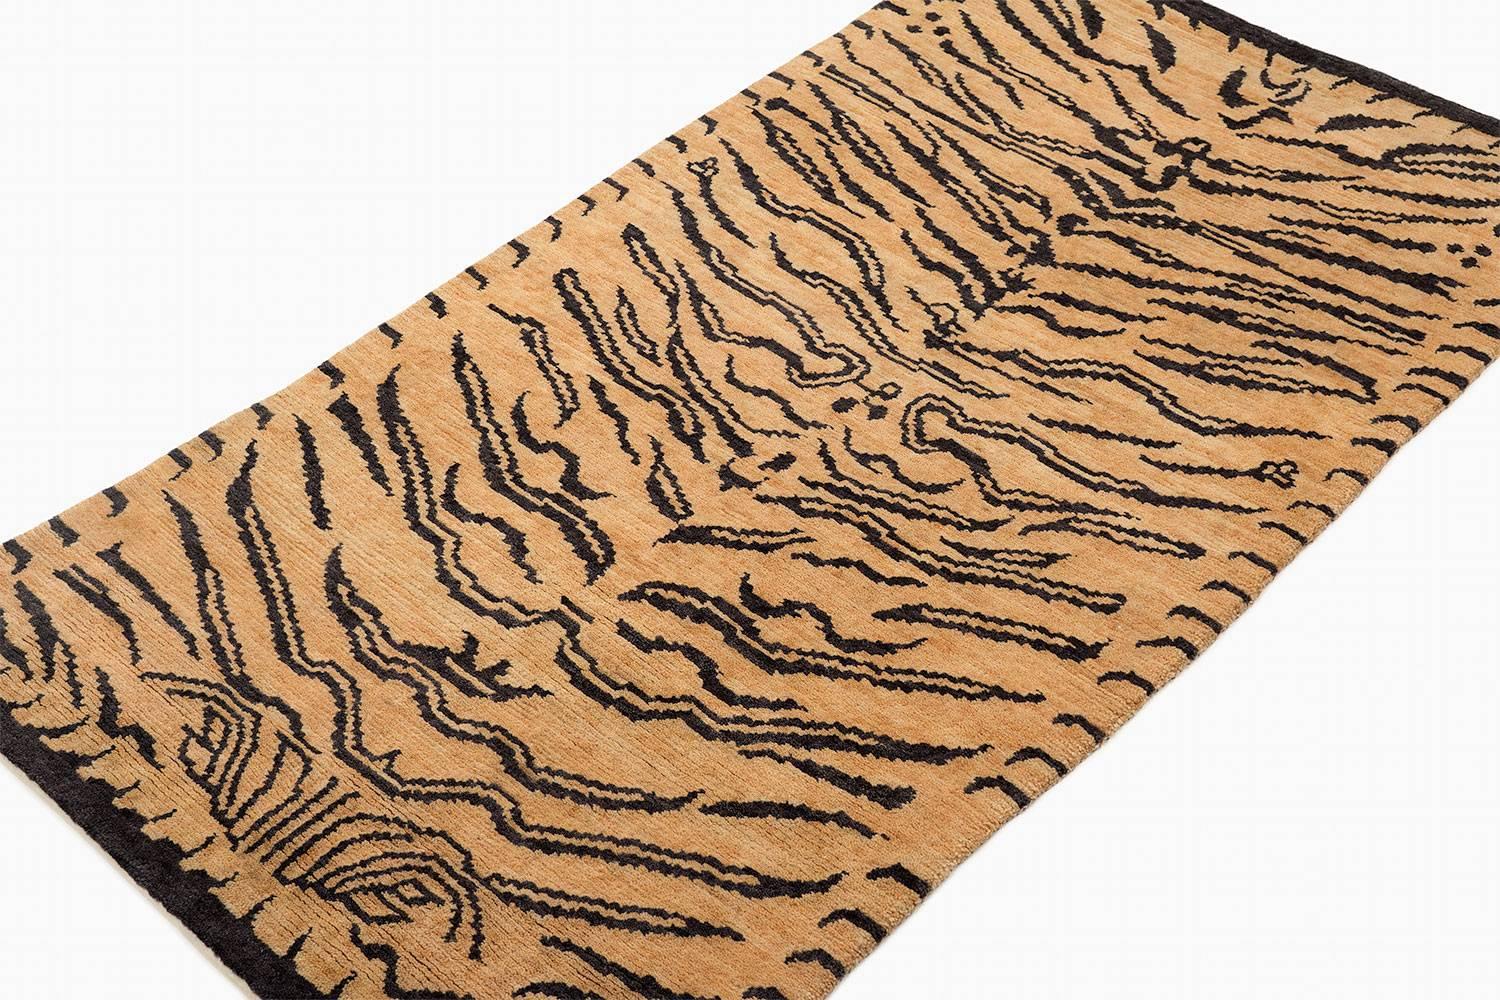 'Sanskrit Tiger' carpet is a fresh take on an original Joseph Carini design. It has a textured weave - a Devi weave, 60 Knot. It is 100 % wool, hand-spun, and handwoven in Nepal. The abstract animal print is bold but not overwhelmingly